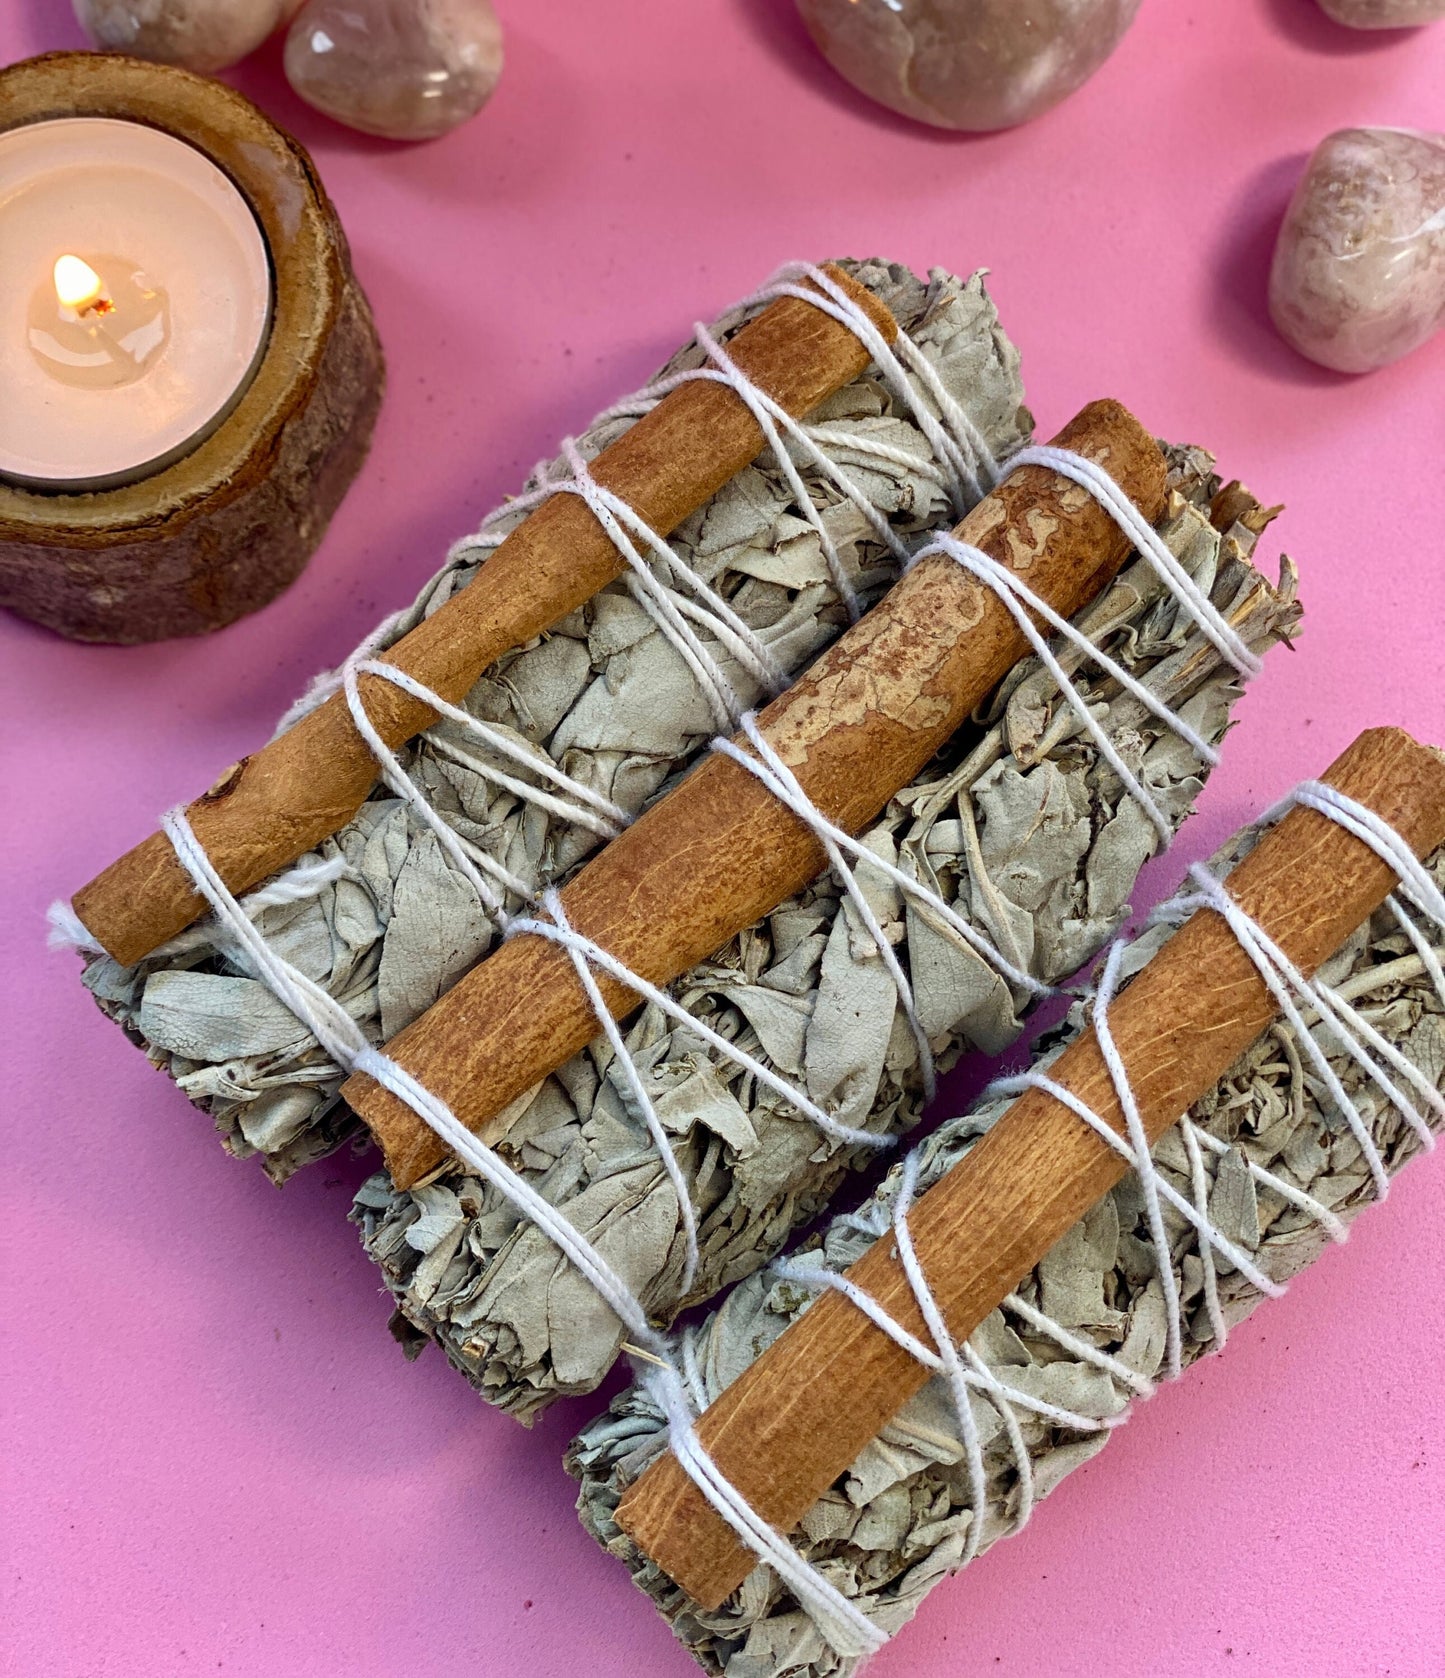 Sage and cinnamon smudge stick, Cleanse your aura, home and crystals, Abundance ritual, Burn cinnamon for prosperity